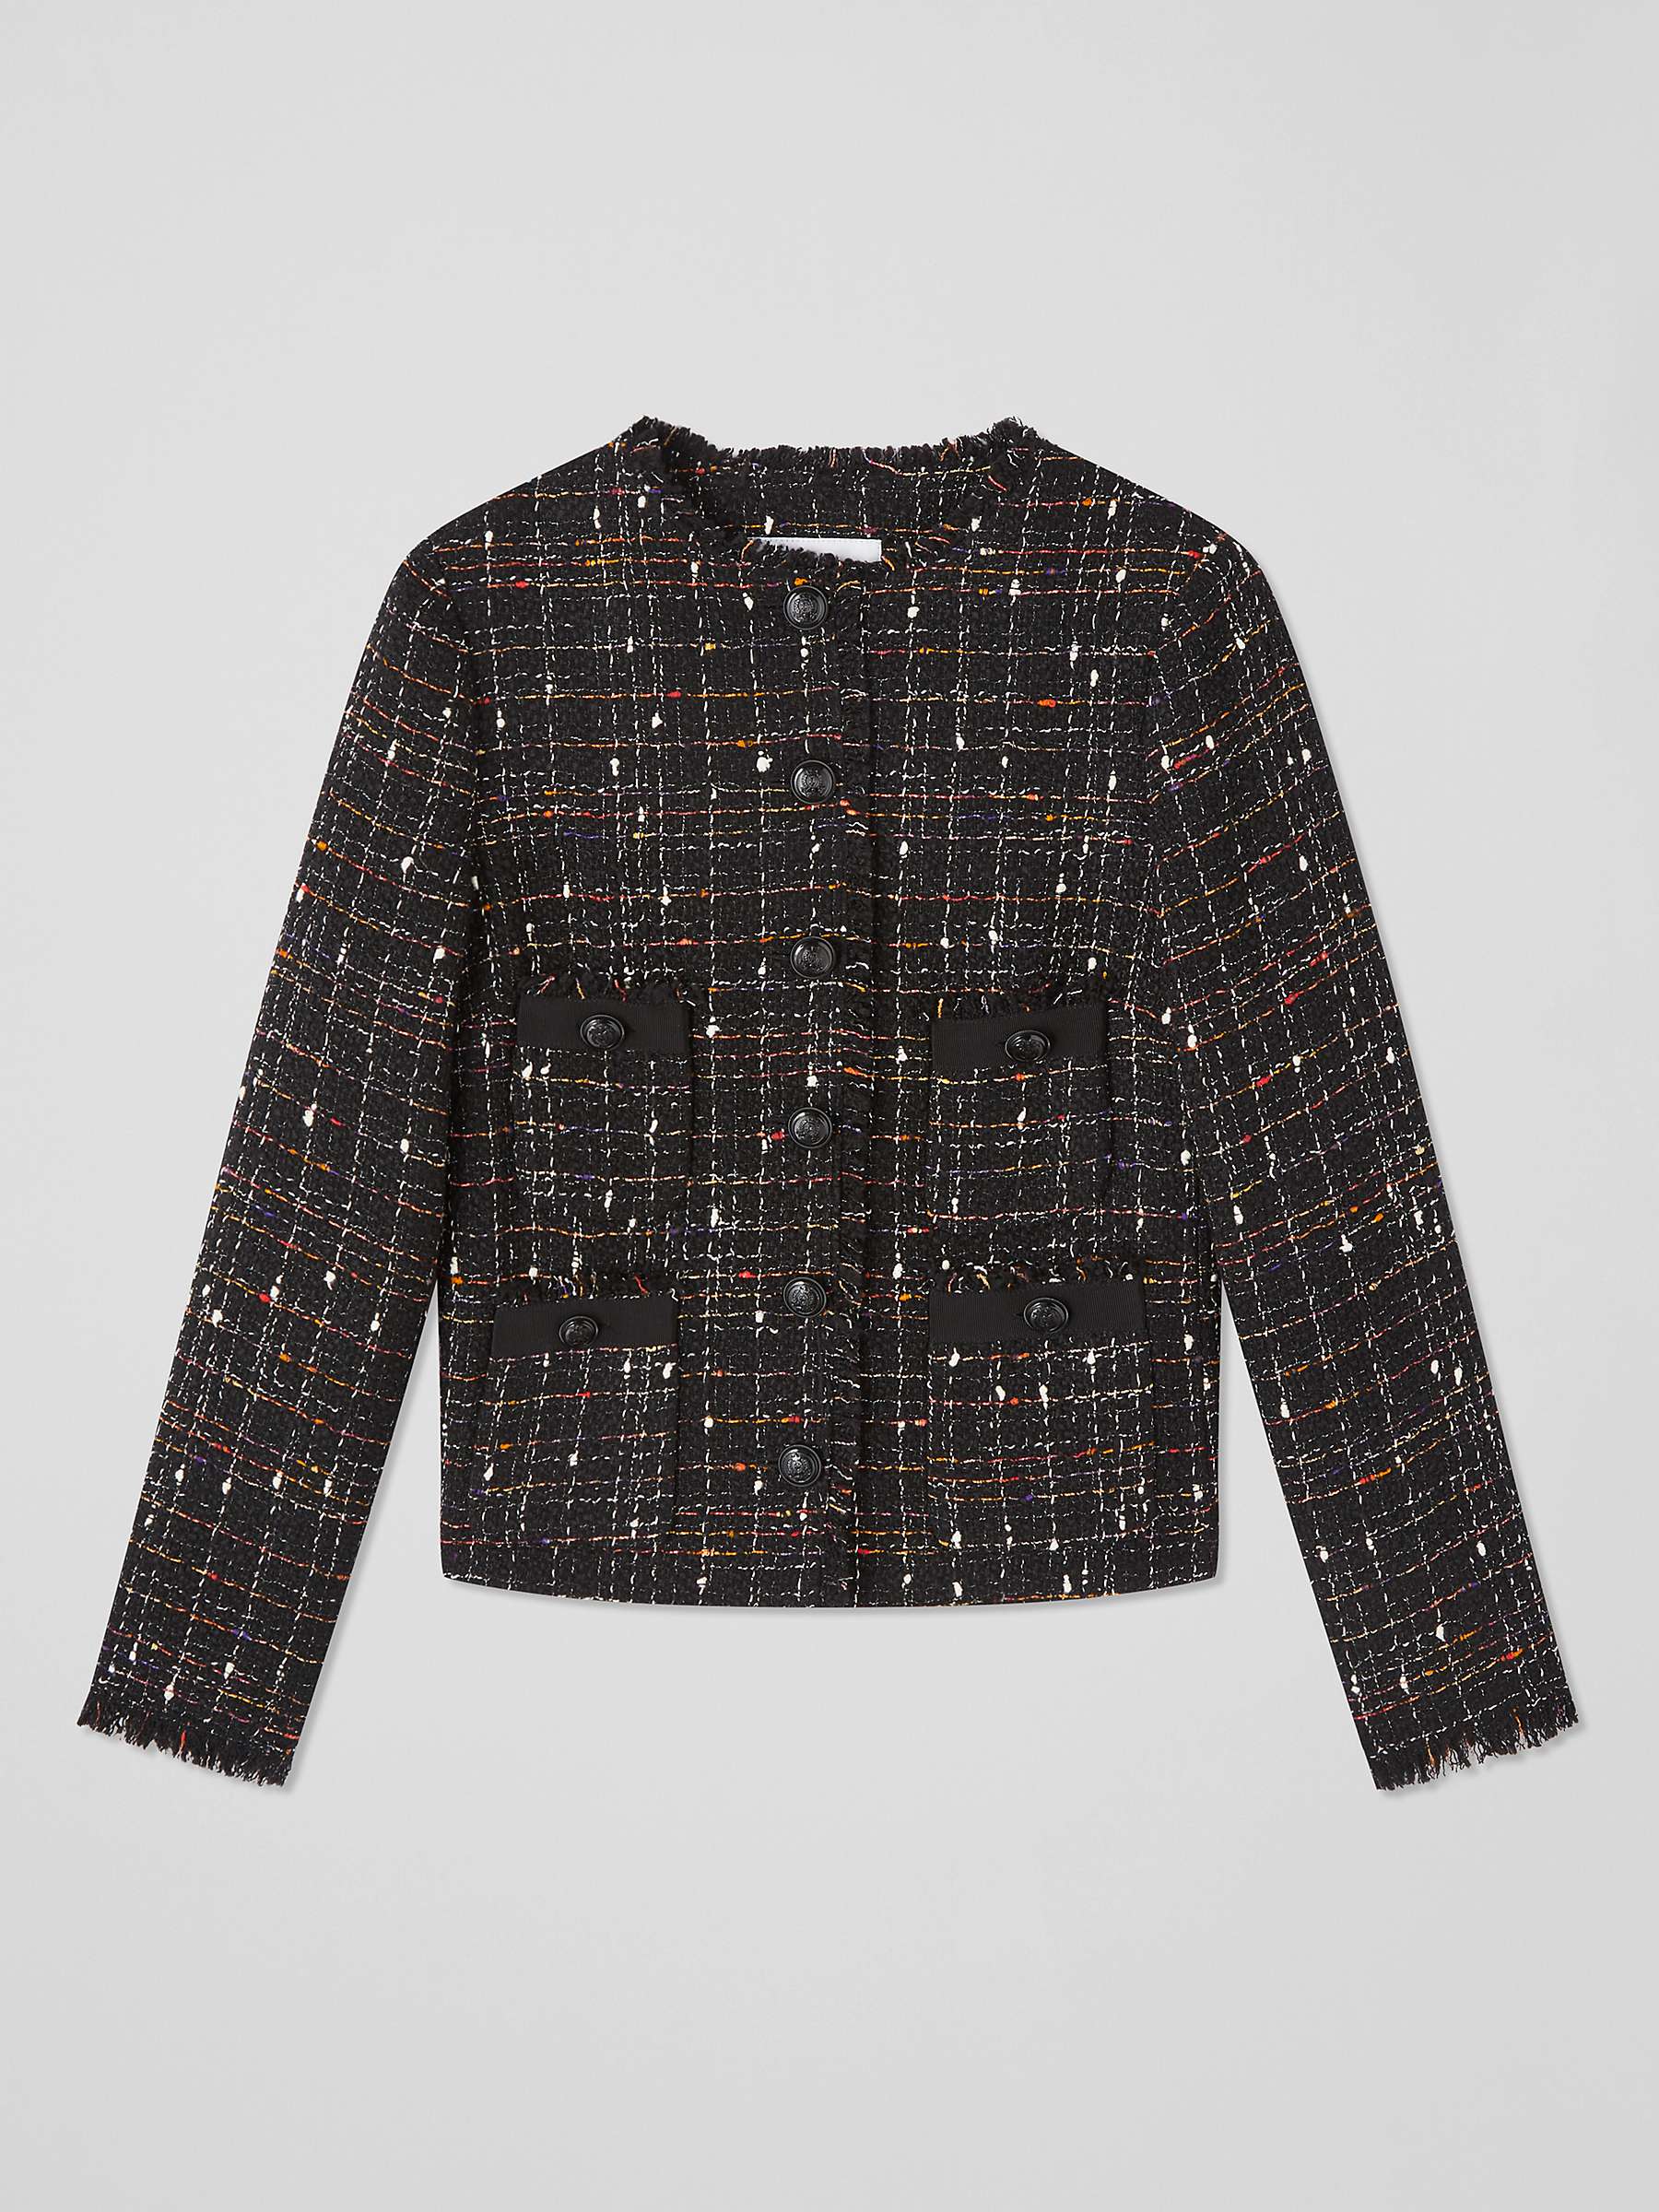 L.K.Bennett x Ascot Collection: Angelica Tweed Jacket, Black/Multi at ...